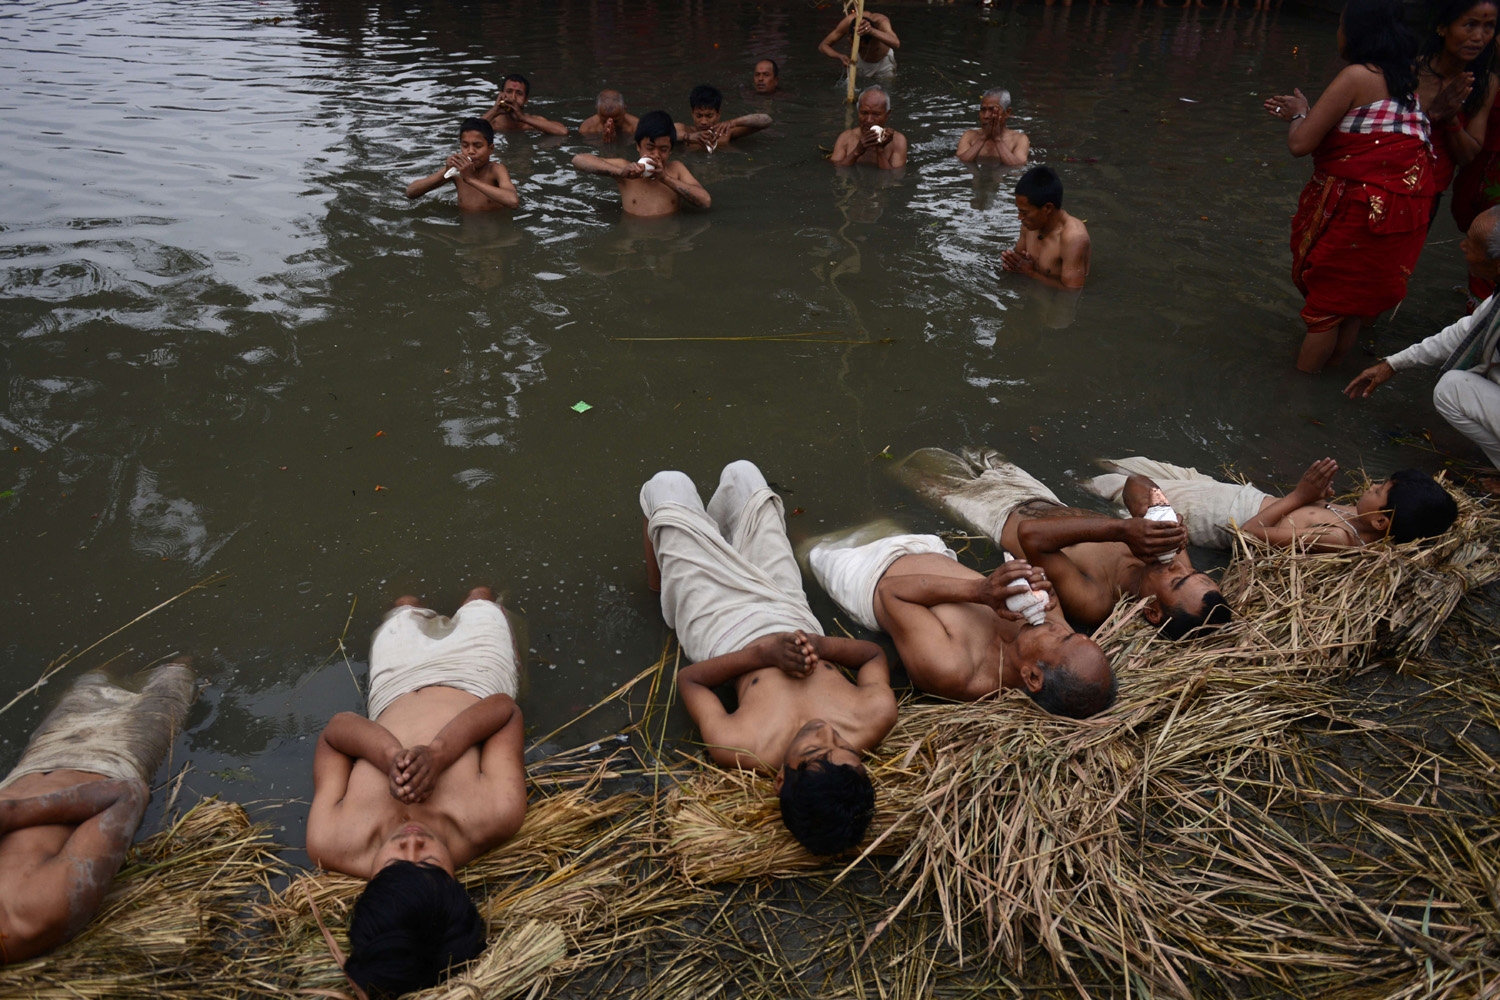 Feb. 14, 2014. Nepalese Hindu devotees perform a bathing ritual on the final day of the month-long Swasthani Festival near the Hanumante River at Bhaktapur, on the outskirts of Kathmandu, Nepal.